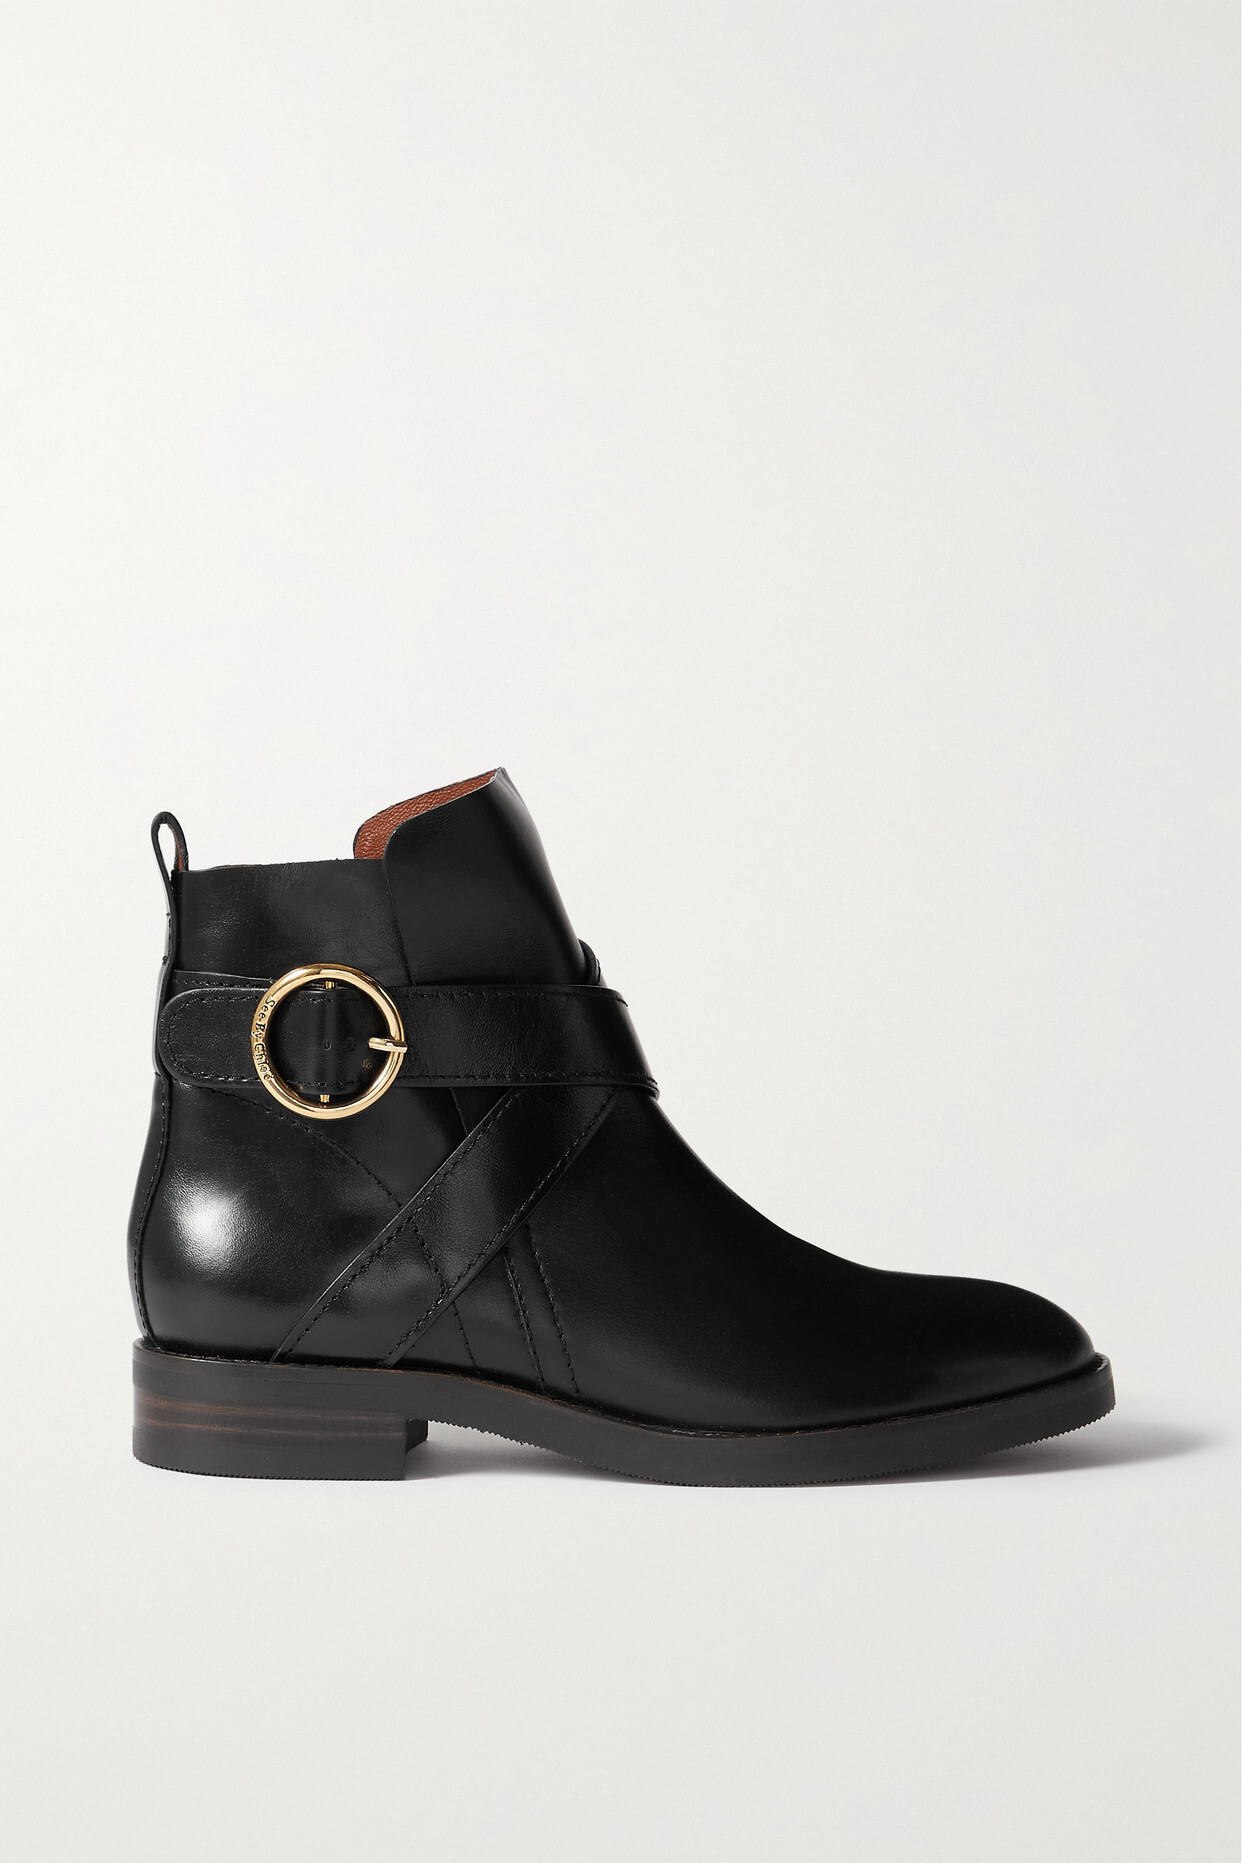 See By Chloé See By Chloé - Lyna Leather Ankle Boots - Black